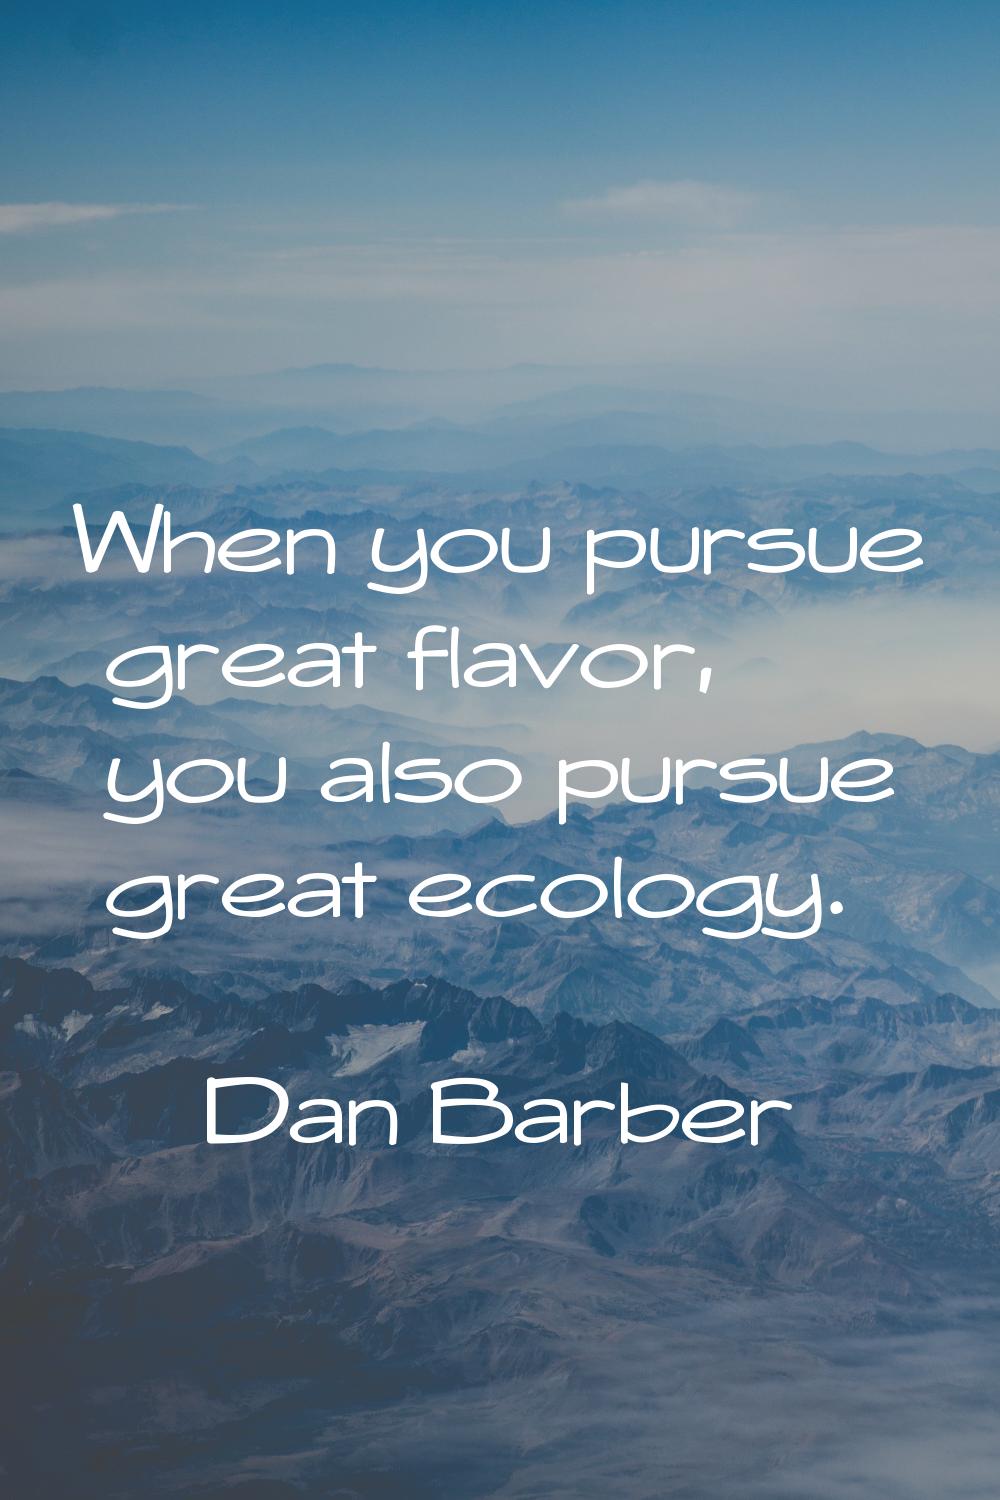 When you pursue great flavor, you also pursue great ecology.